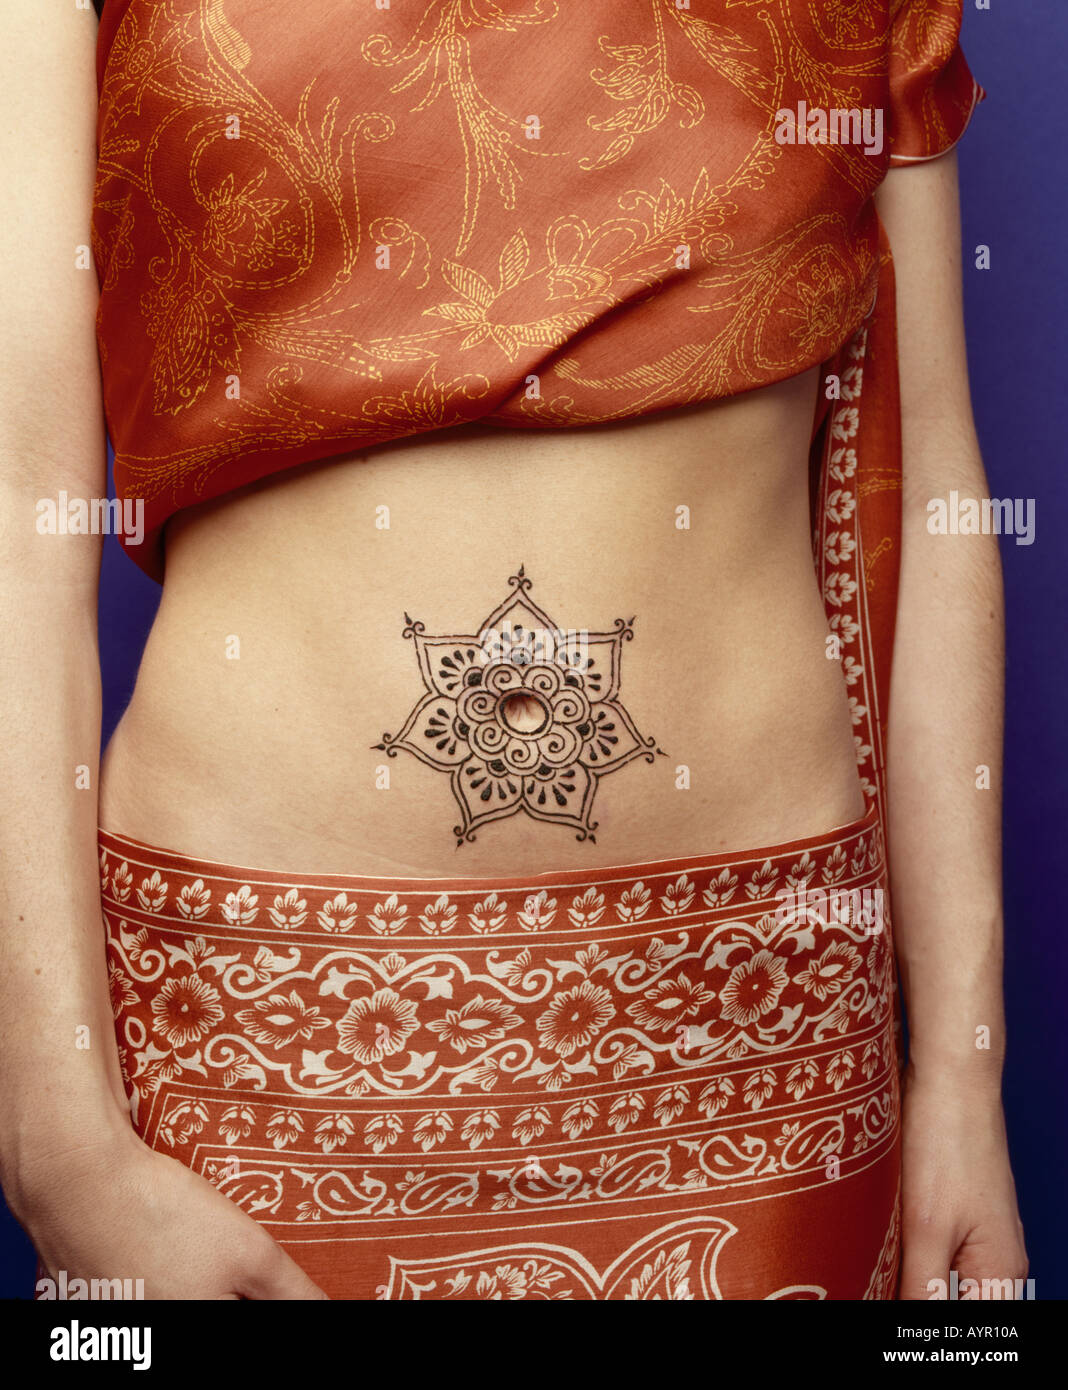 What are the meanings behind getting a tattoo around or below one's belly  button? - Quora